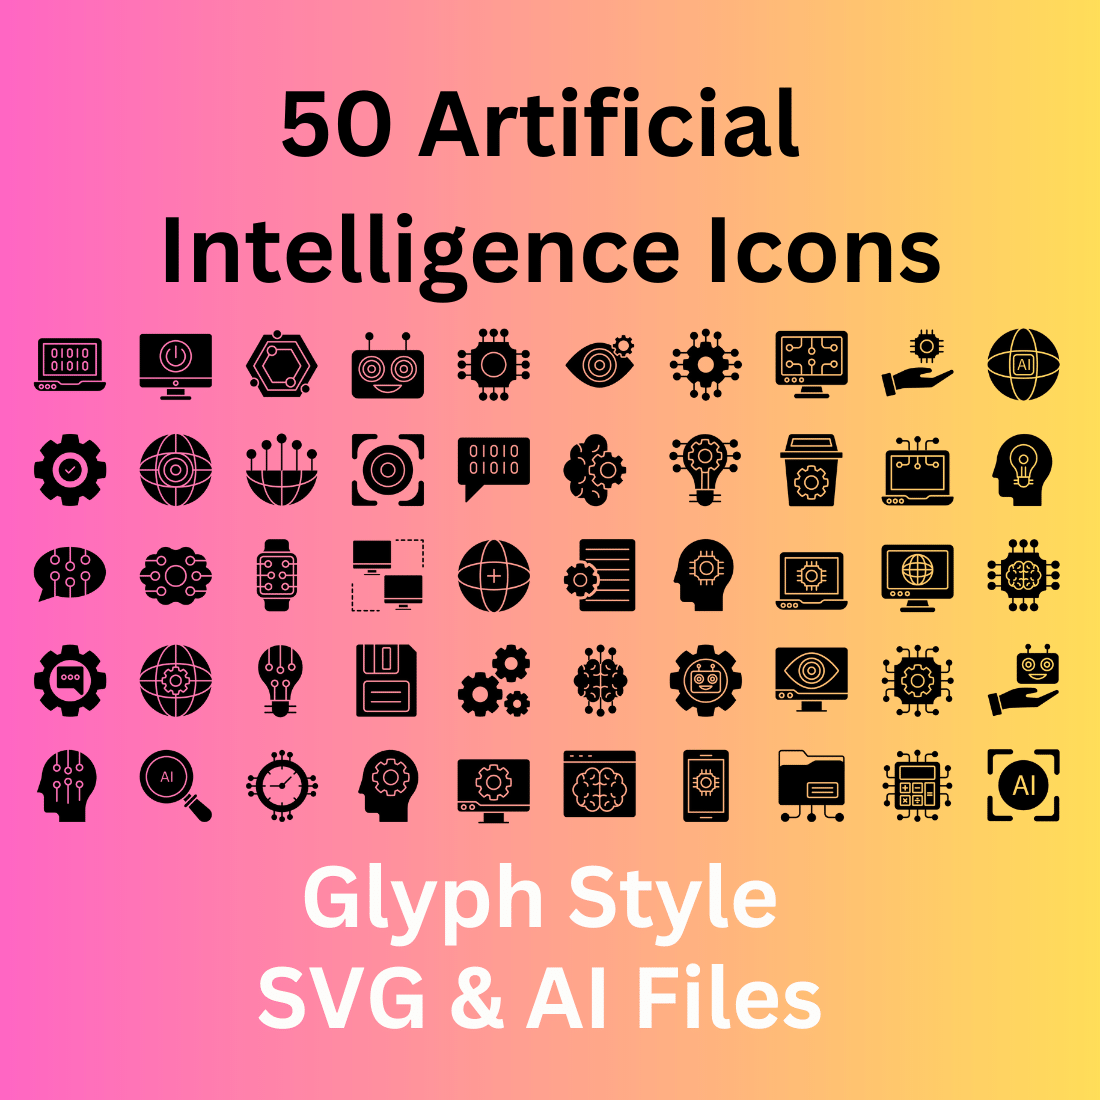 Artificial Intelligence Icon Set 50 Glyph Icons - SVG And AI cover image.